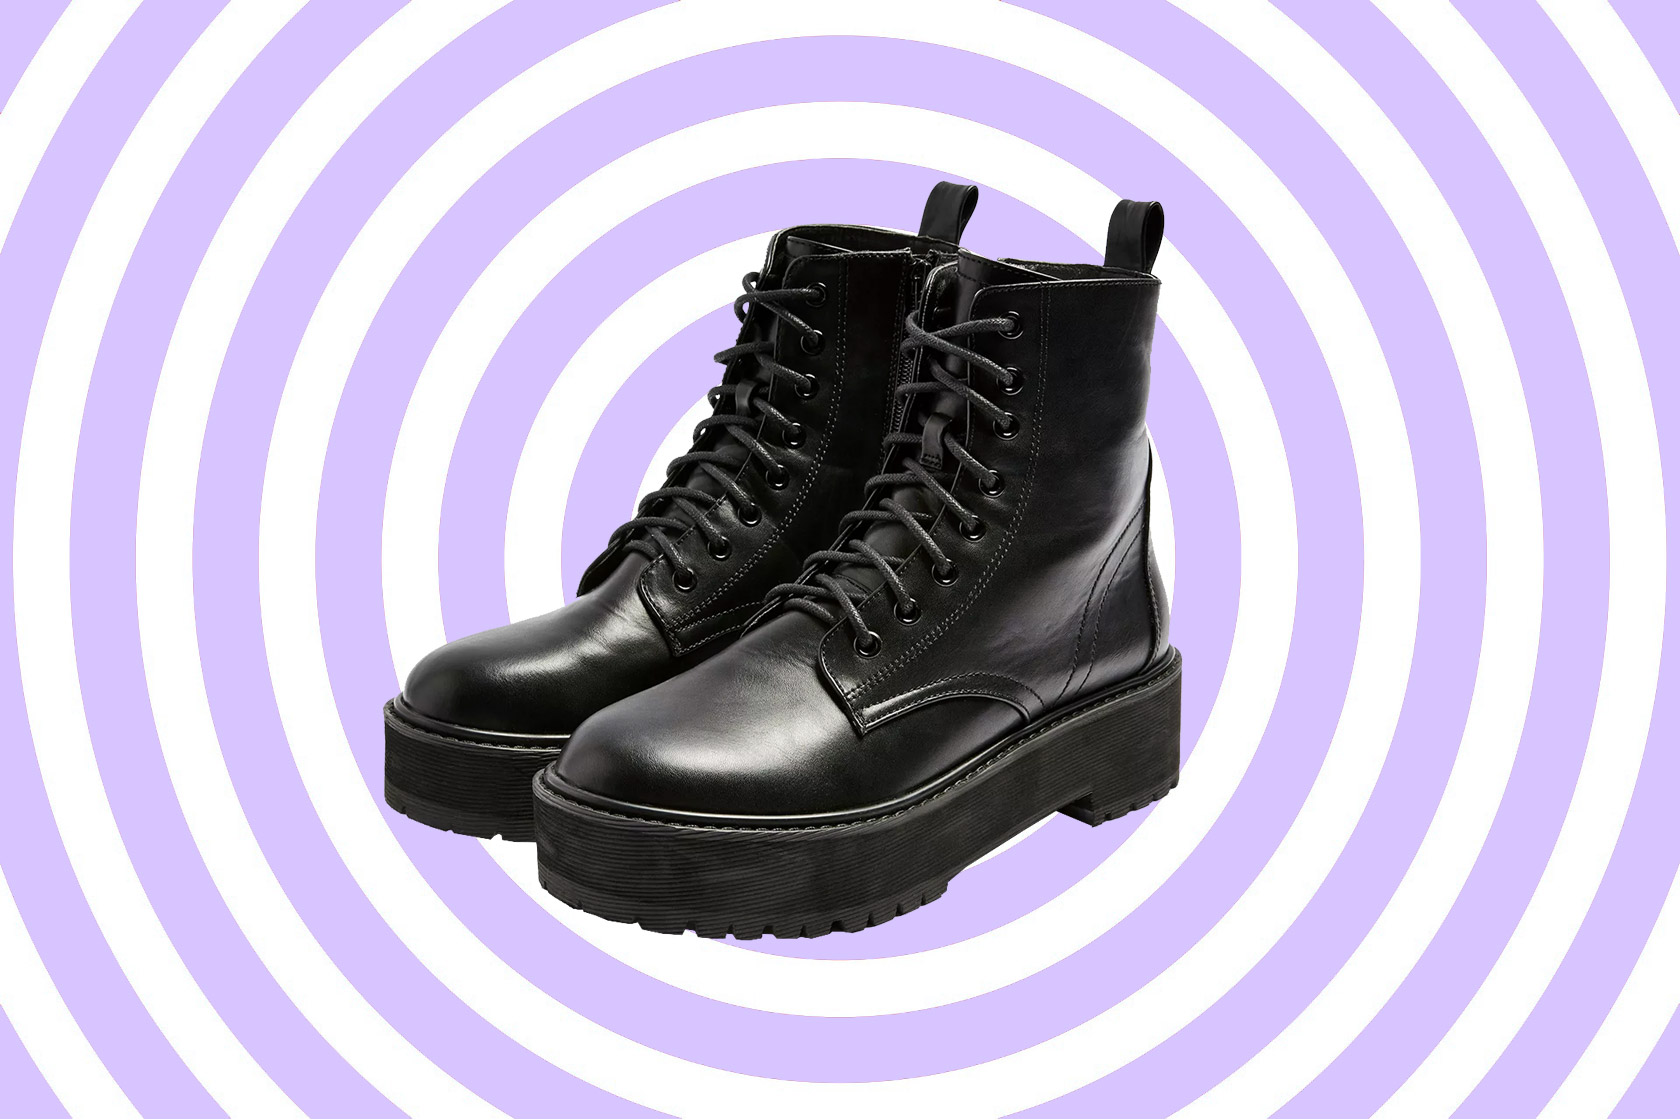 What to wear with black boots for Spring 2020